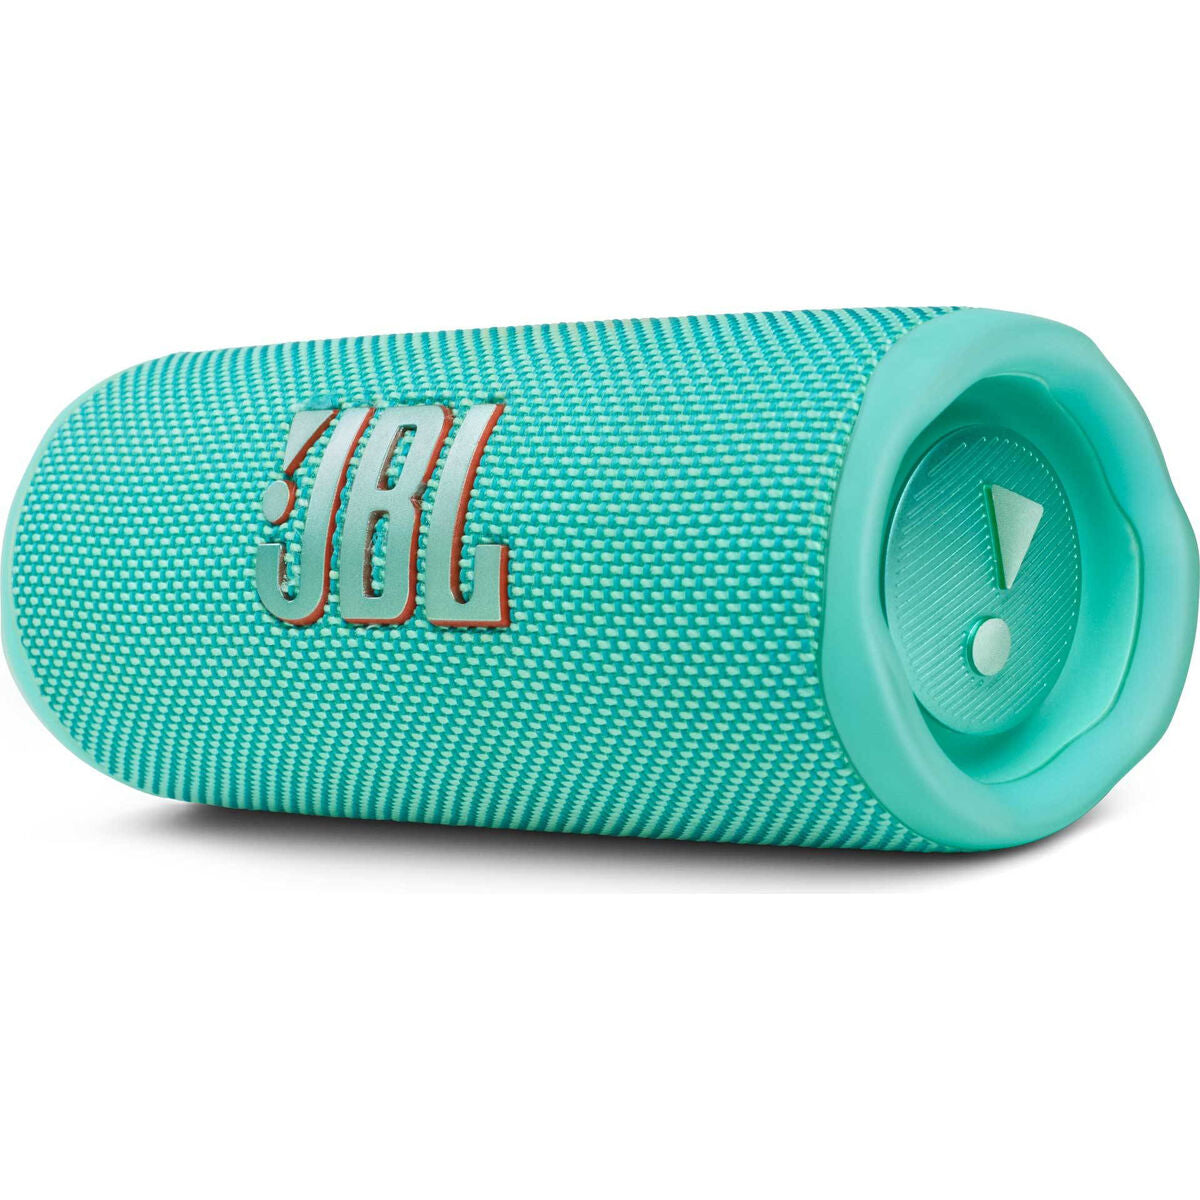 Portable Bluetooth Speakers JBL Flip 6 20 W Turquoise, JBL, Electronics, Mobile communication and accessories, portable-bluetooth-speakers-jbl-flip-6-20-w-turquoise, Brand_JBL, category-reference-2609, category-reference-2882, category-reference-2923, category-reference-t-19653, category-reference-t-21311, category-reference-t-25527, category-reference-t-4036, category-reference-t-4037, Condition_NEW, entertainment, music, Price_100 - 200, telephones & tablets, wifi y bluetooth, RiotNook